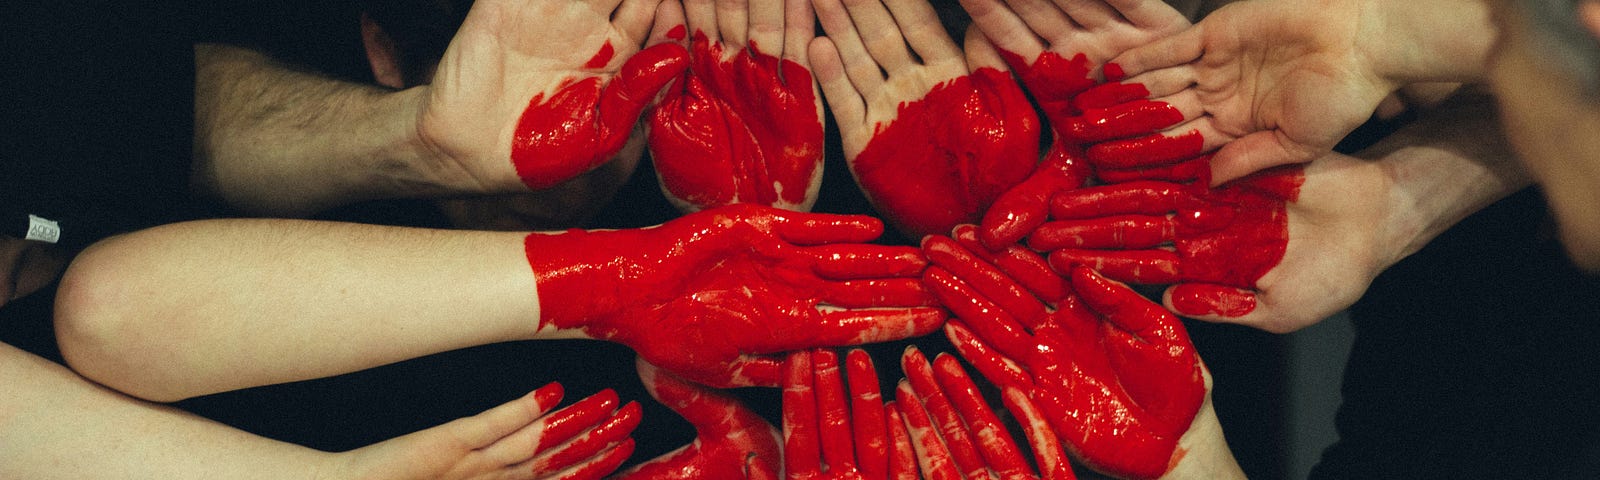 Group of hands together with a red lip-stick painted heart drawn over them.